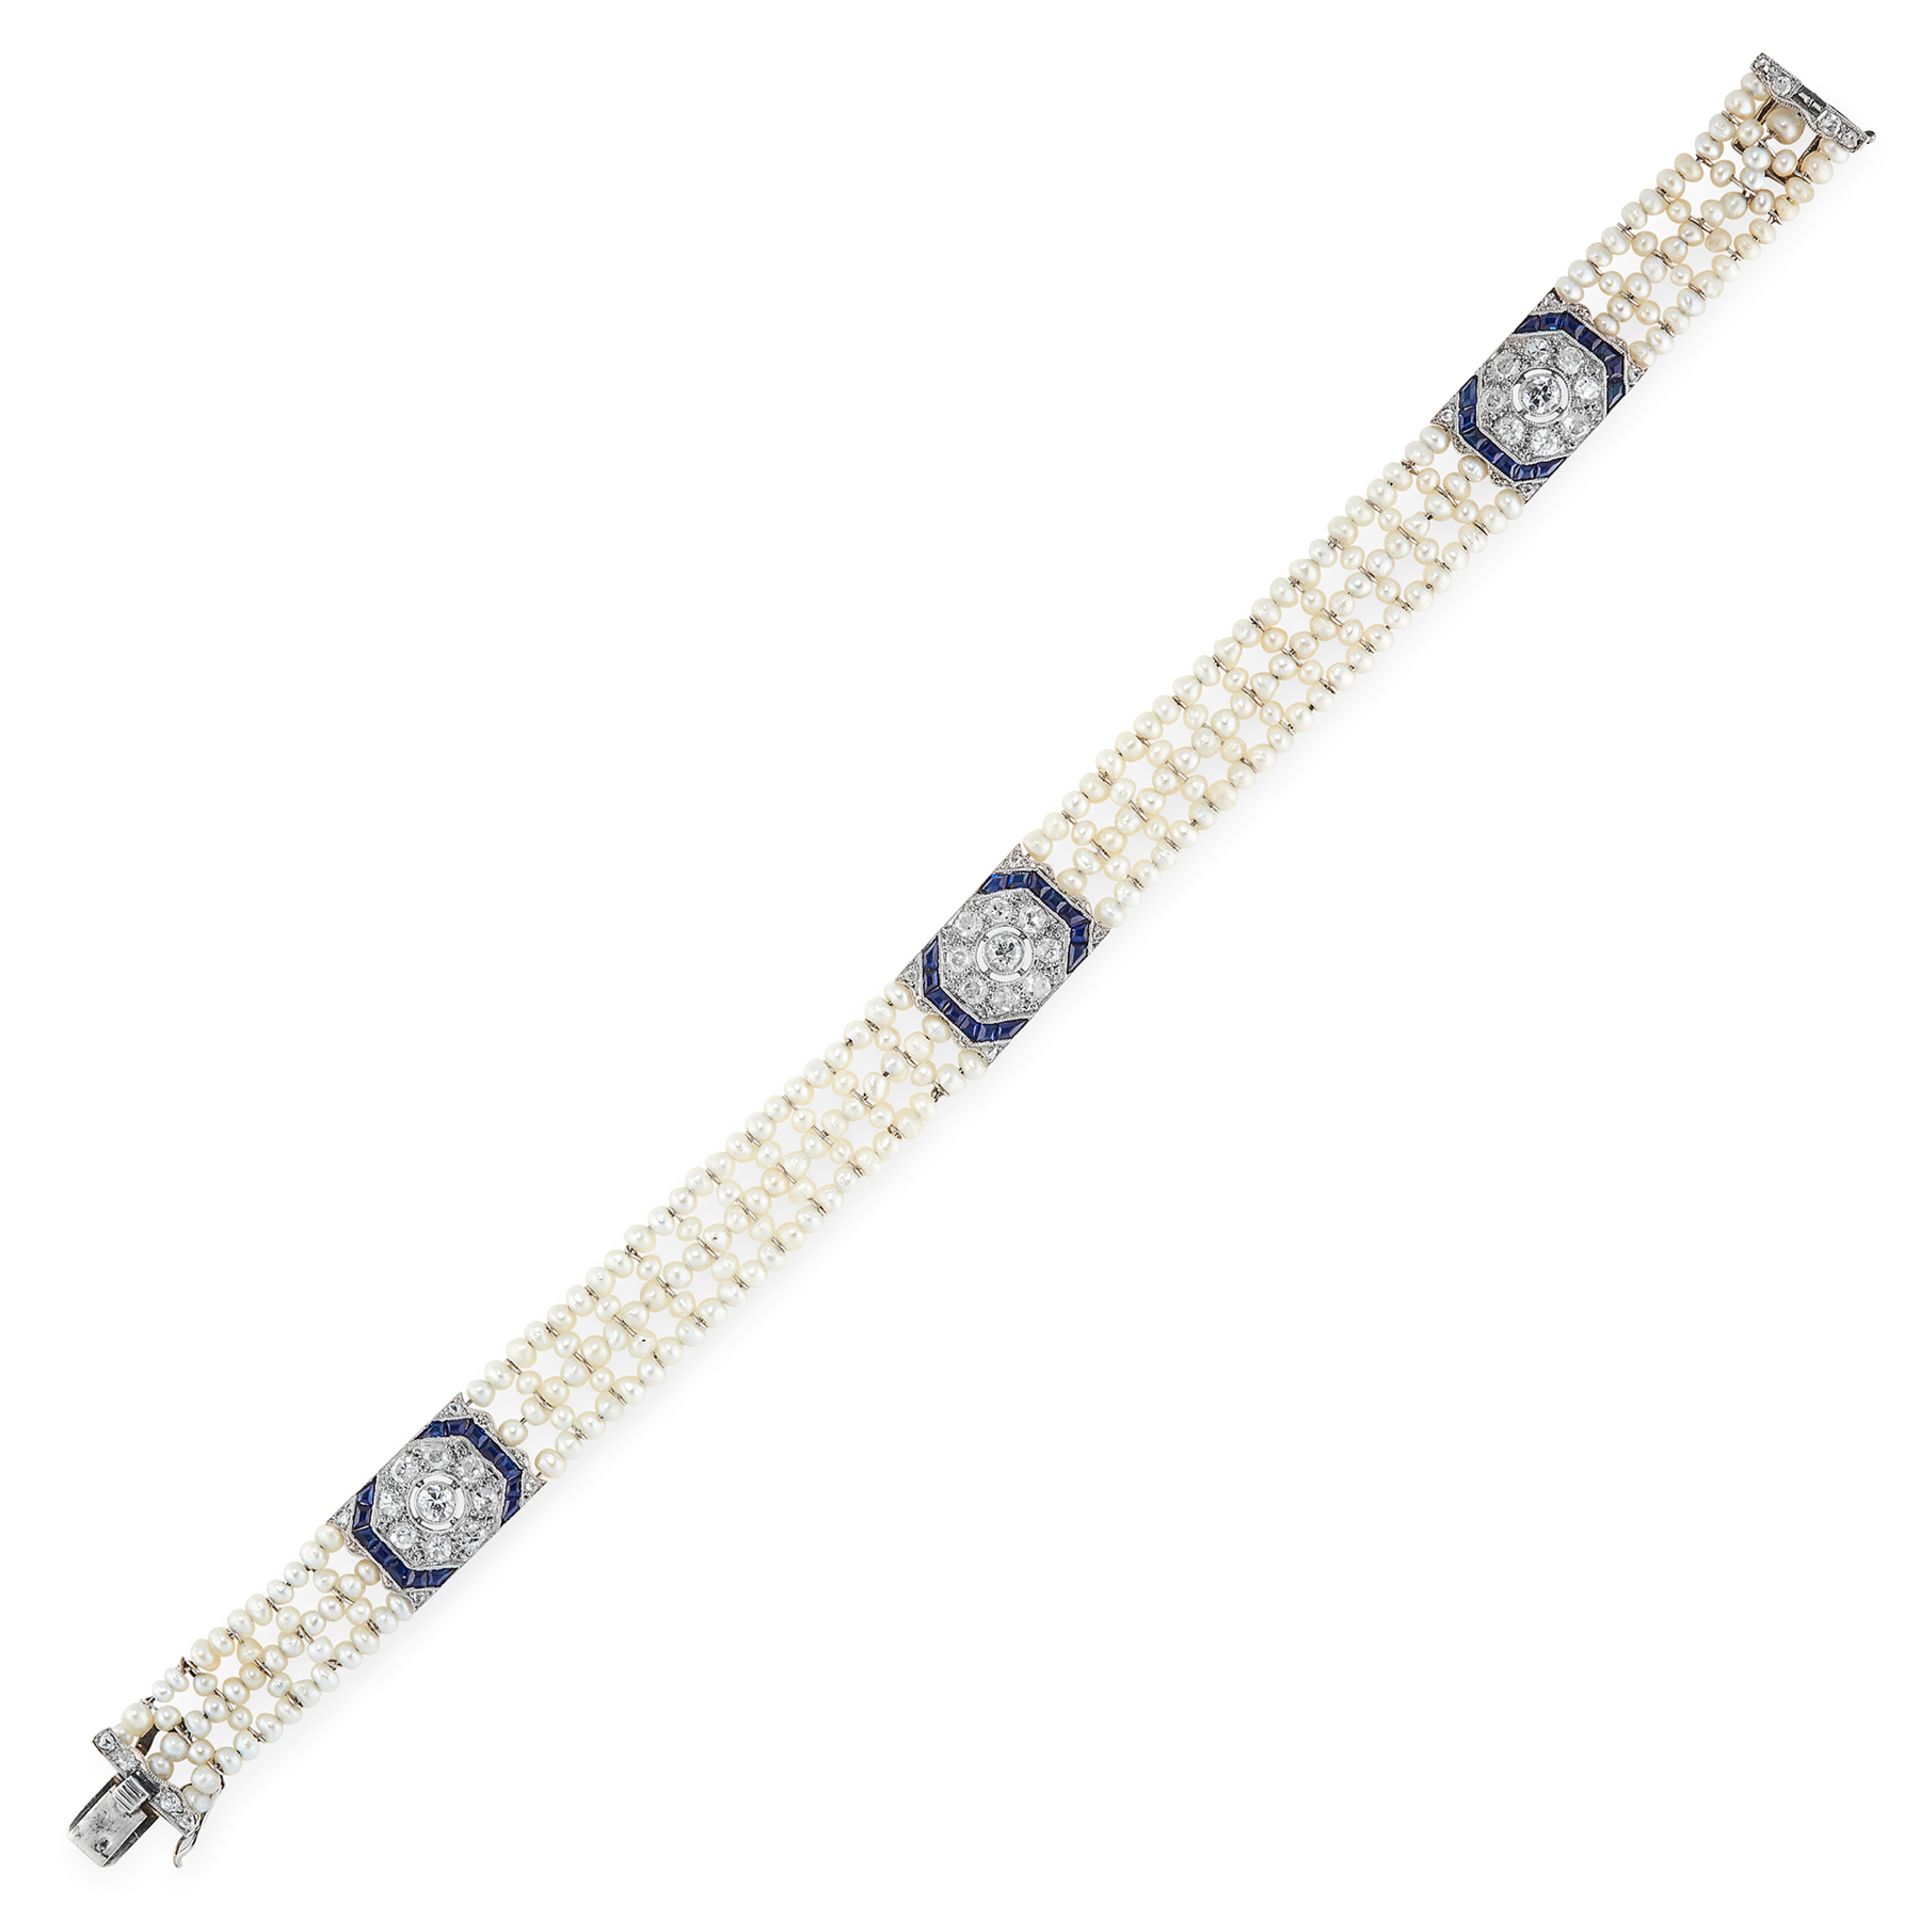 AN ANTIQUE ART DECO PEARL, DIAMOND AND SAPPHIRE BRACELET, EARLY 20TH CENTURY in 18ct white gold,